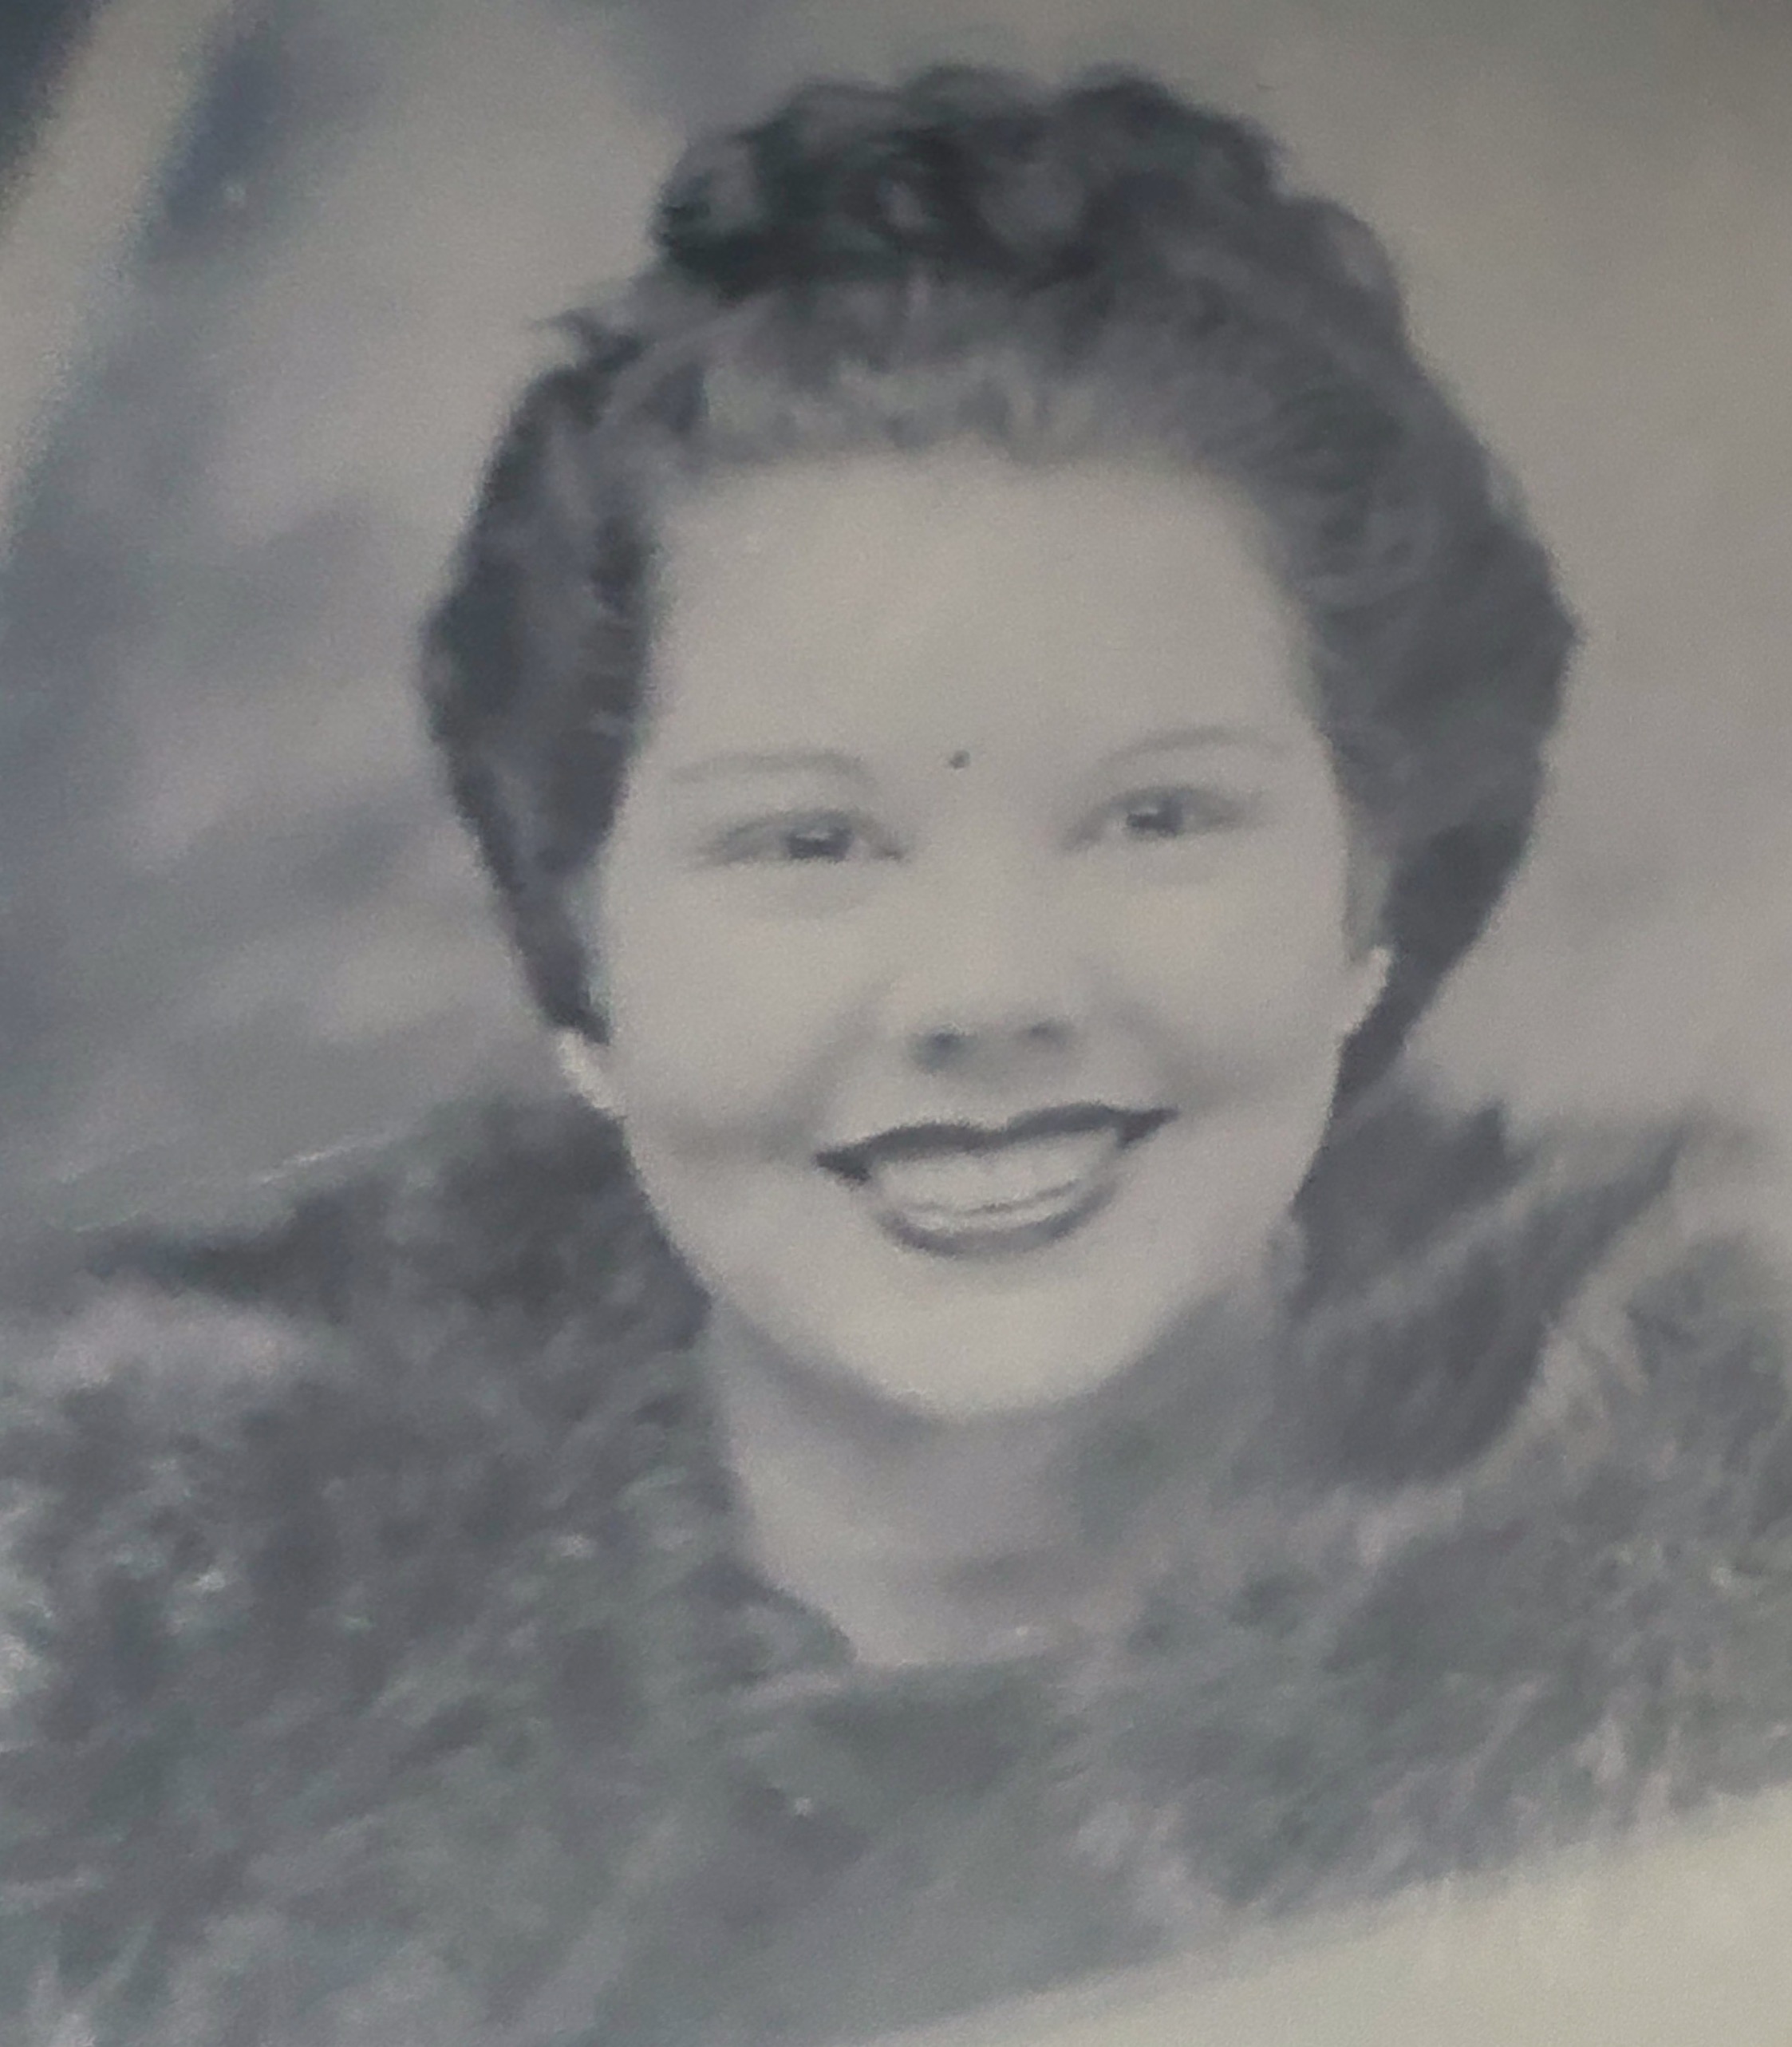 Birth mother. Ft. Lauderdale, Florida, about 1942